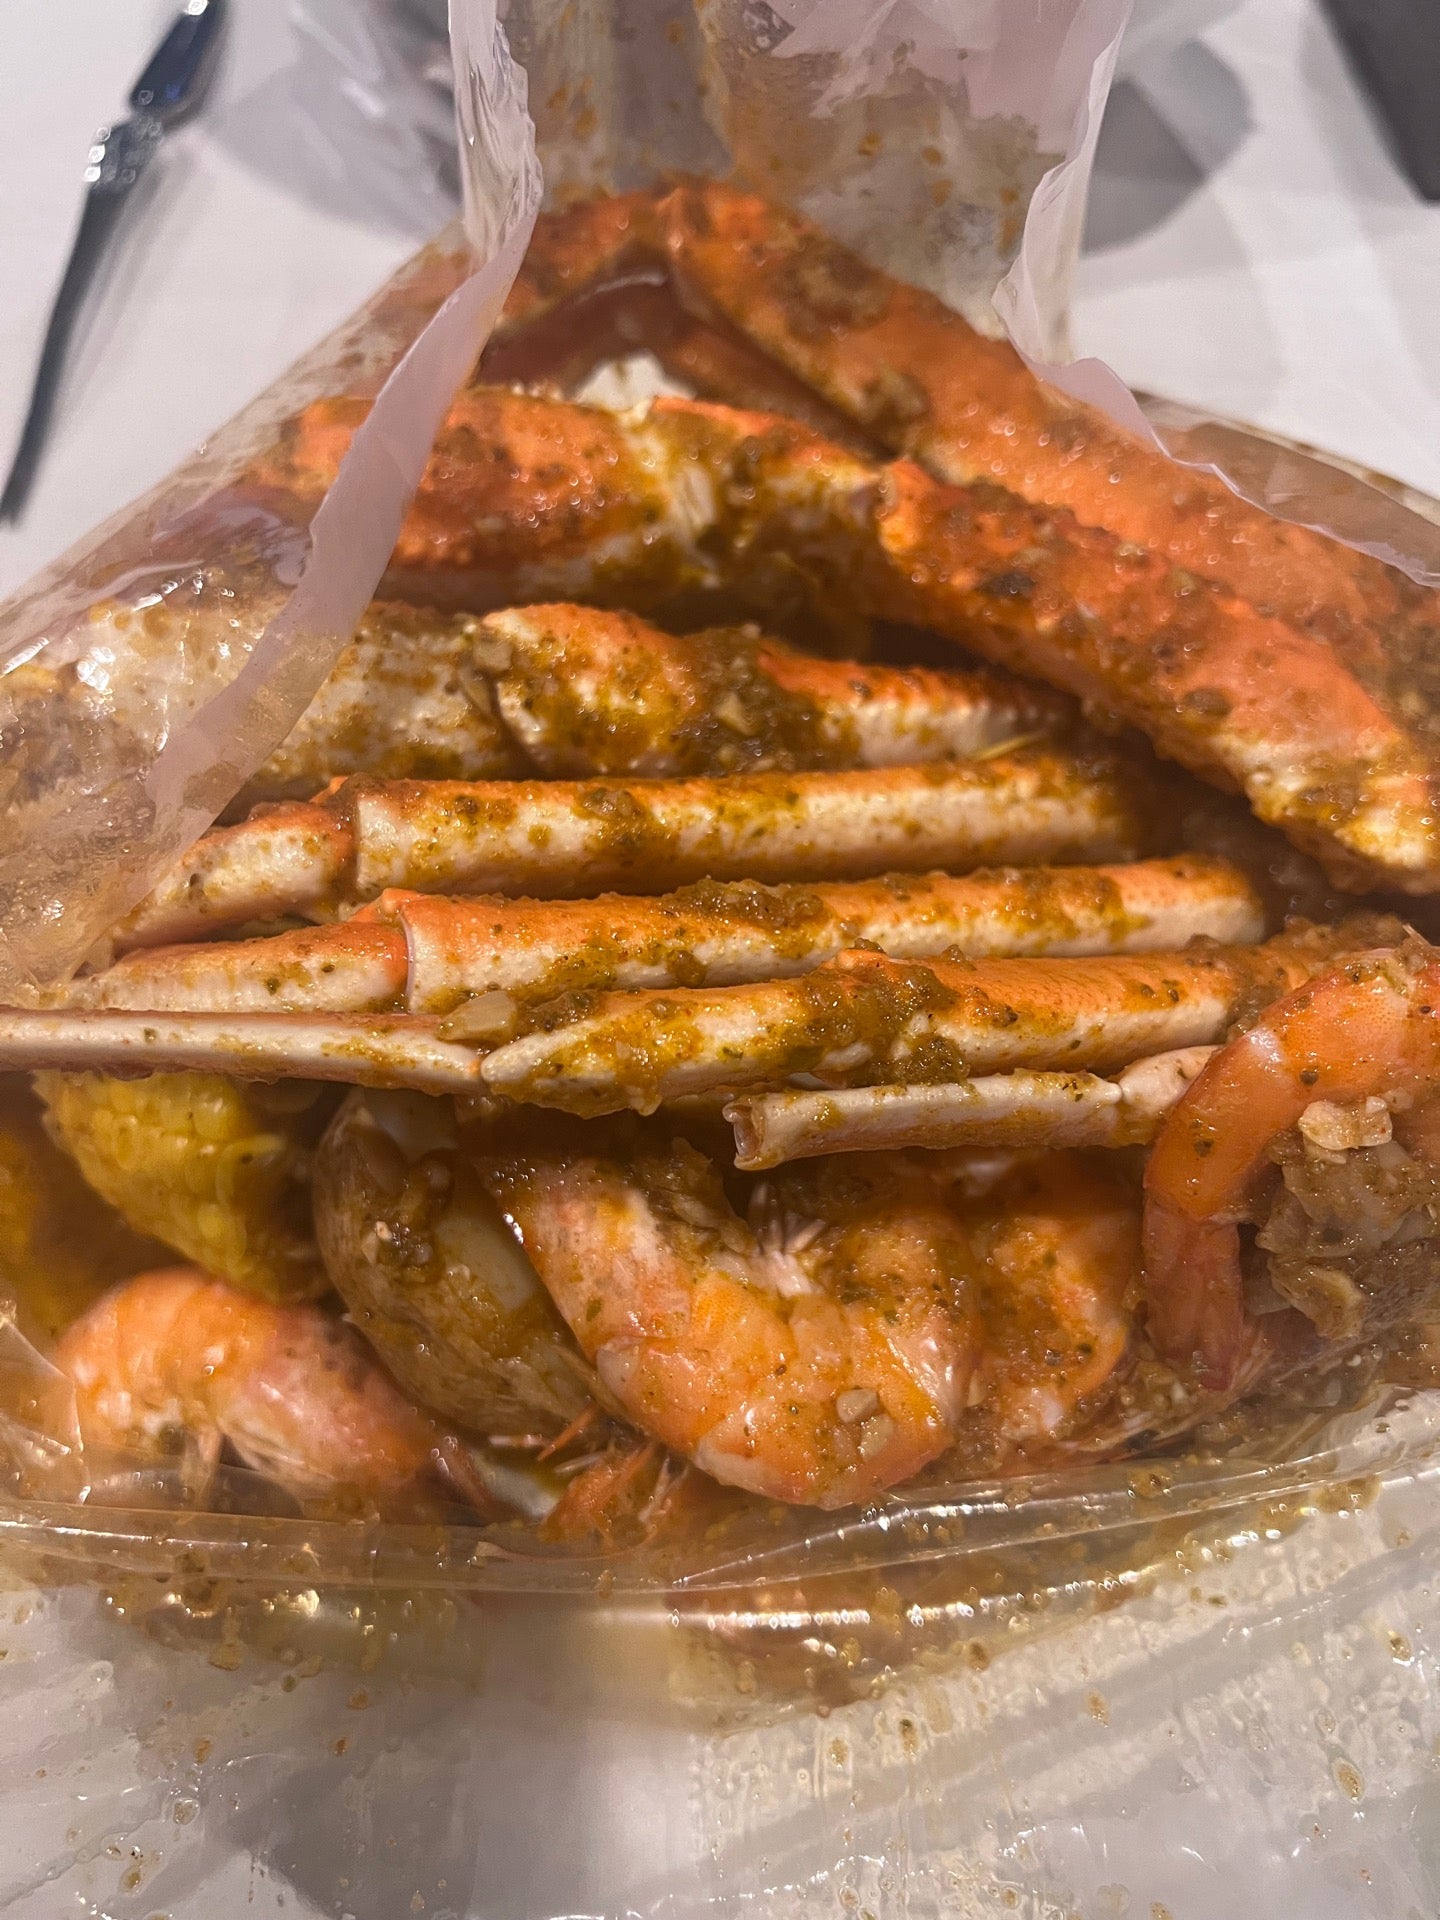 Boiling Crab Seafood